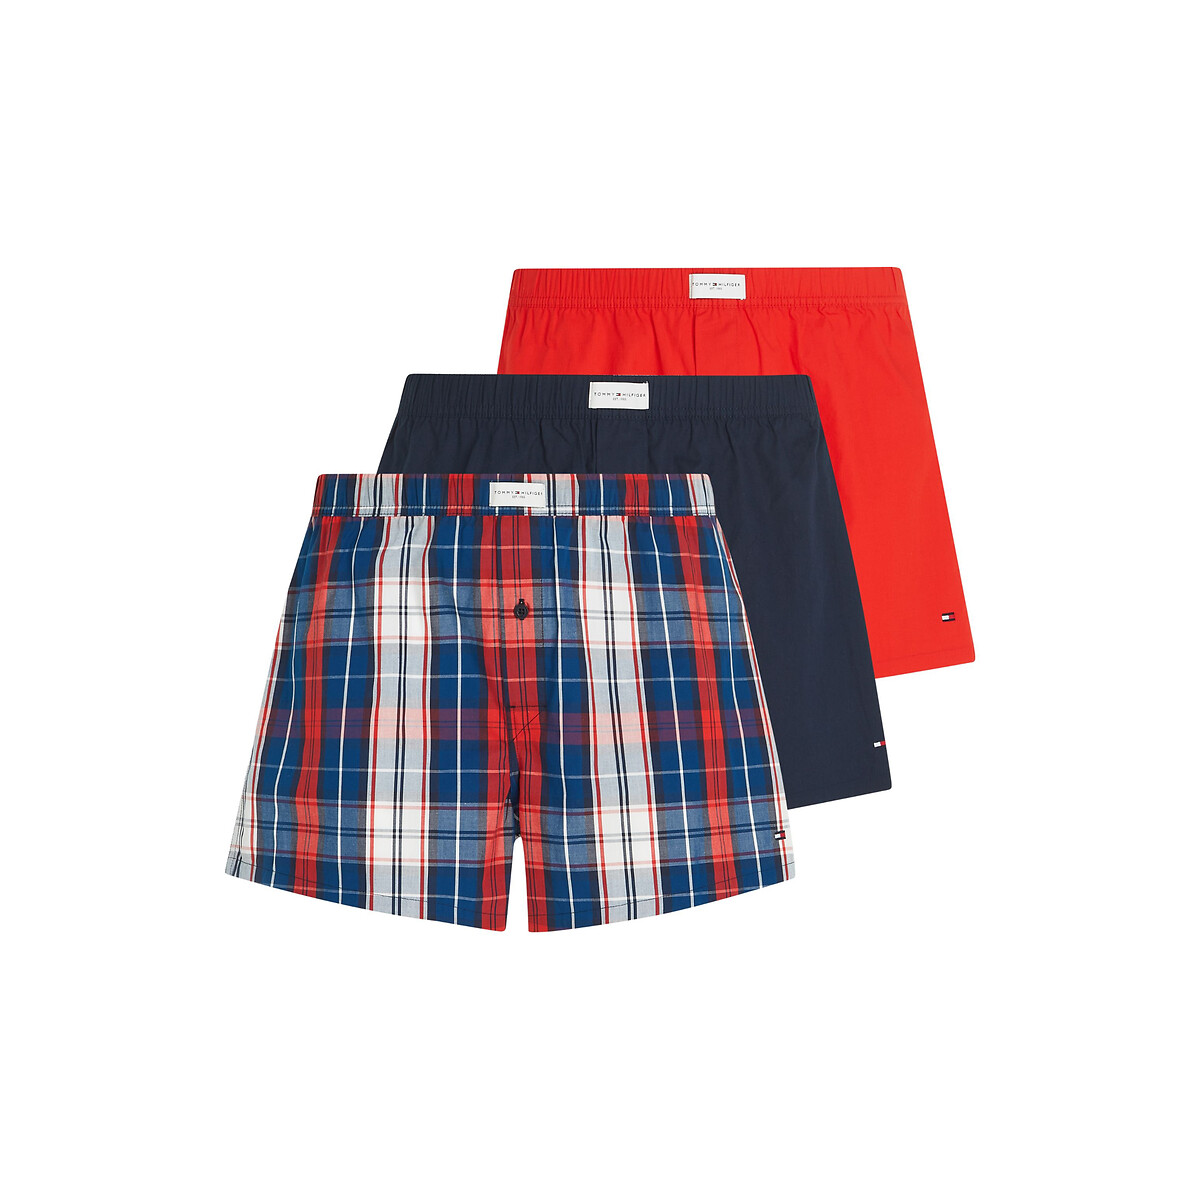 Image of Pack of 3 Boxers in Cotton, 2 Plain/1 Checked